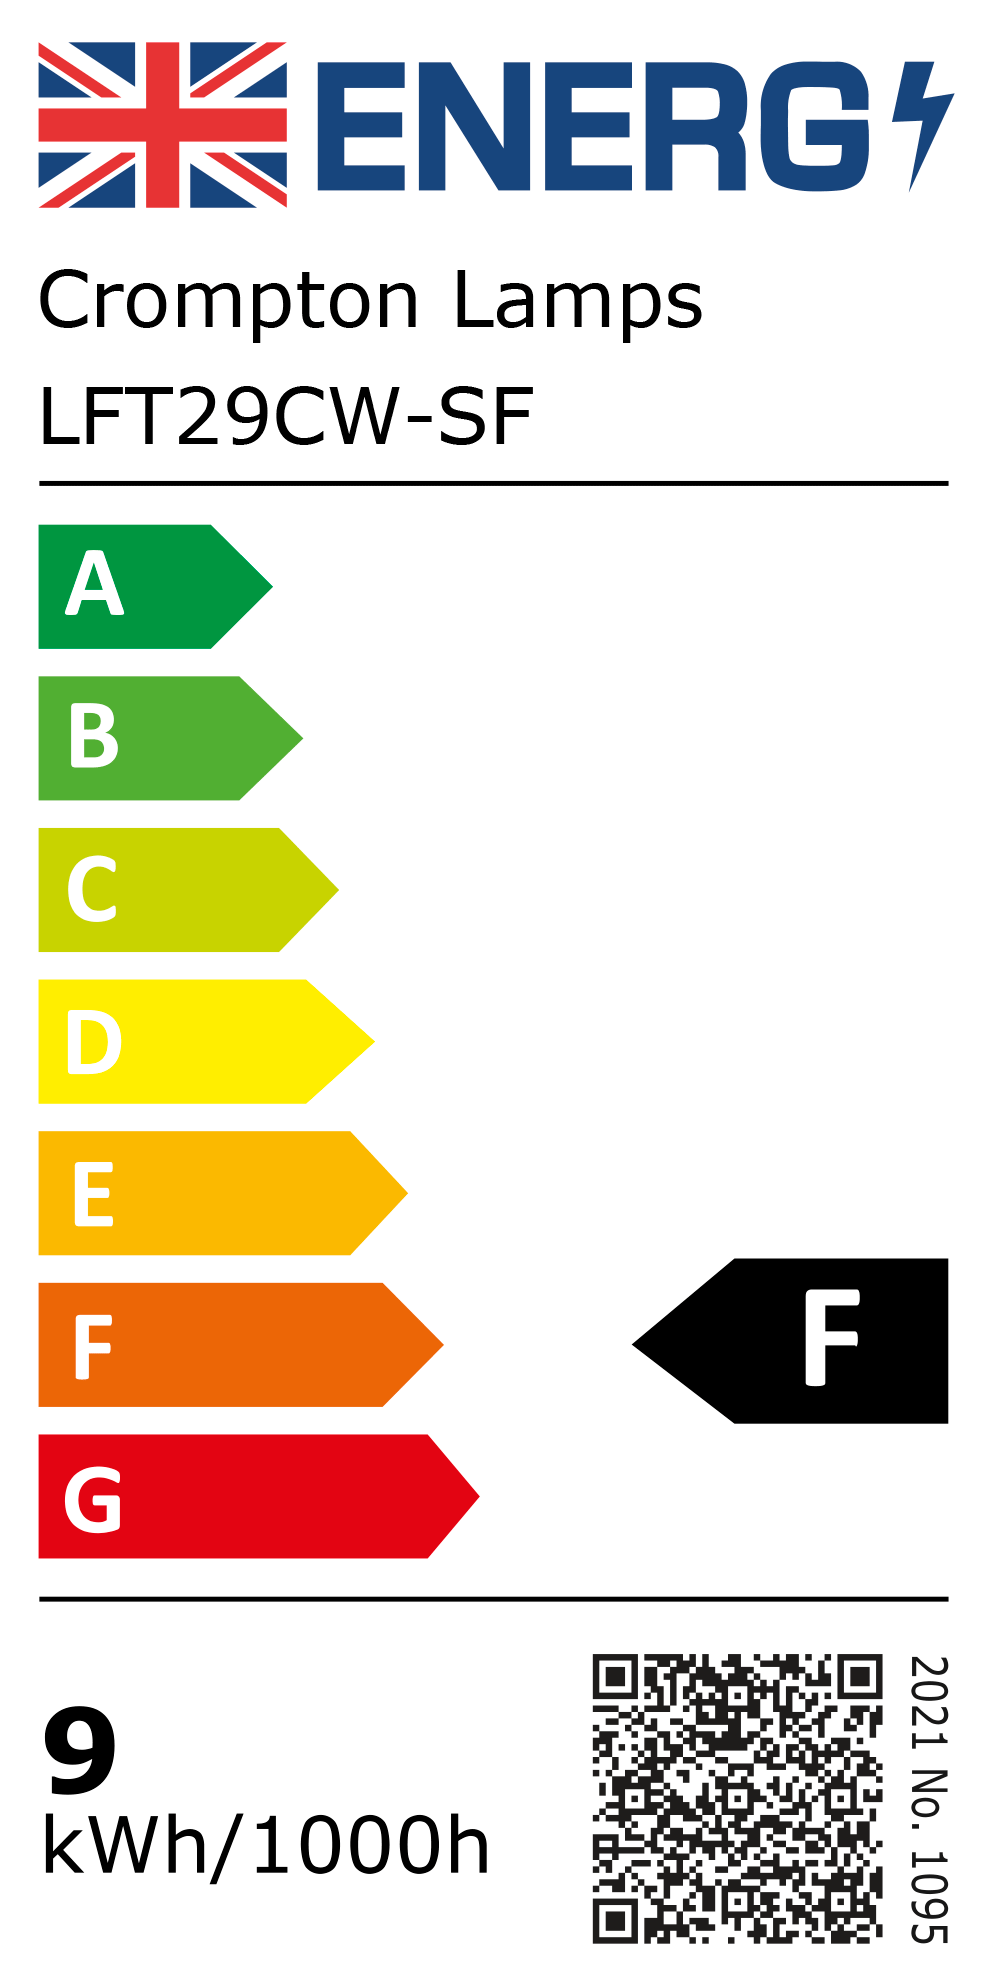 New 2021 Energy Rating Label: Stock Code LFT29CW-SF